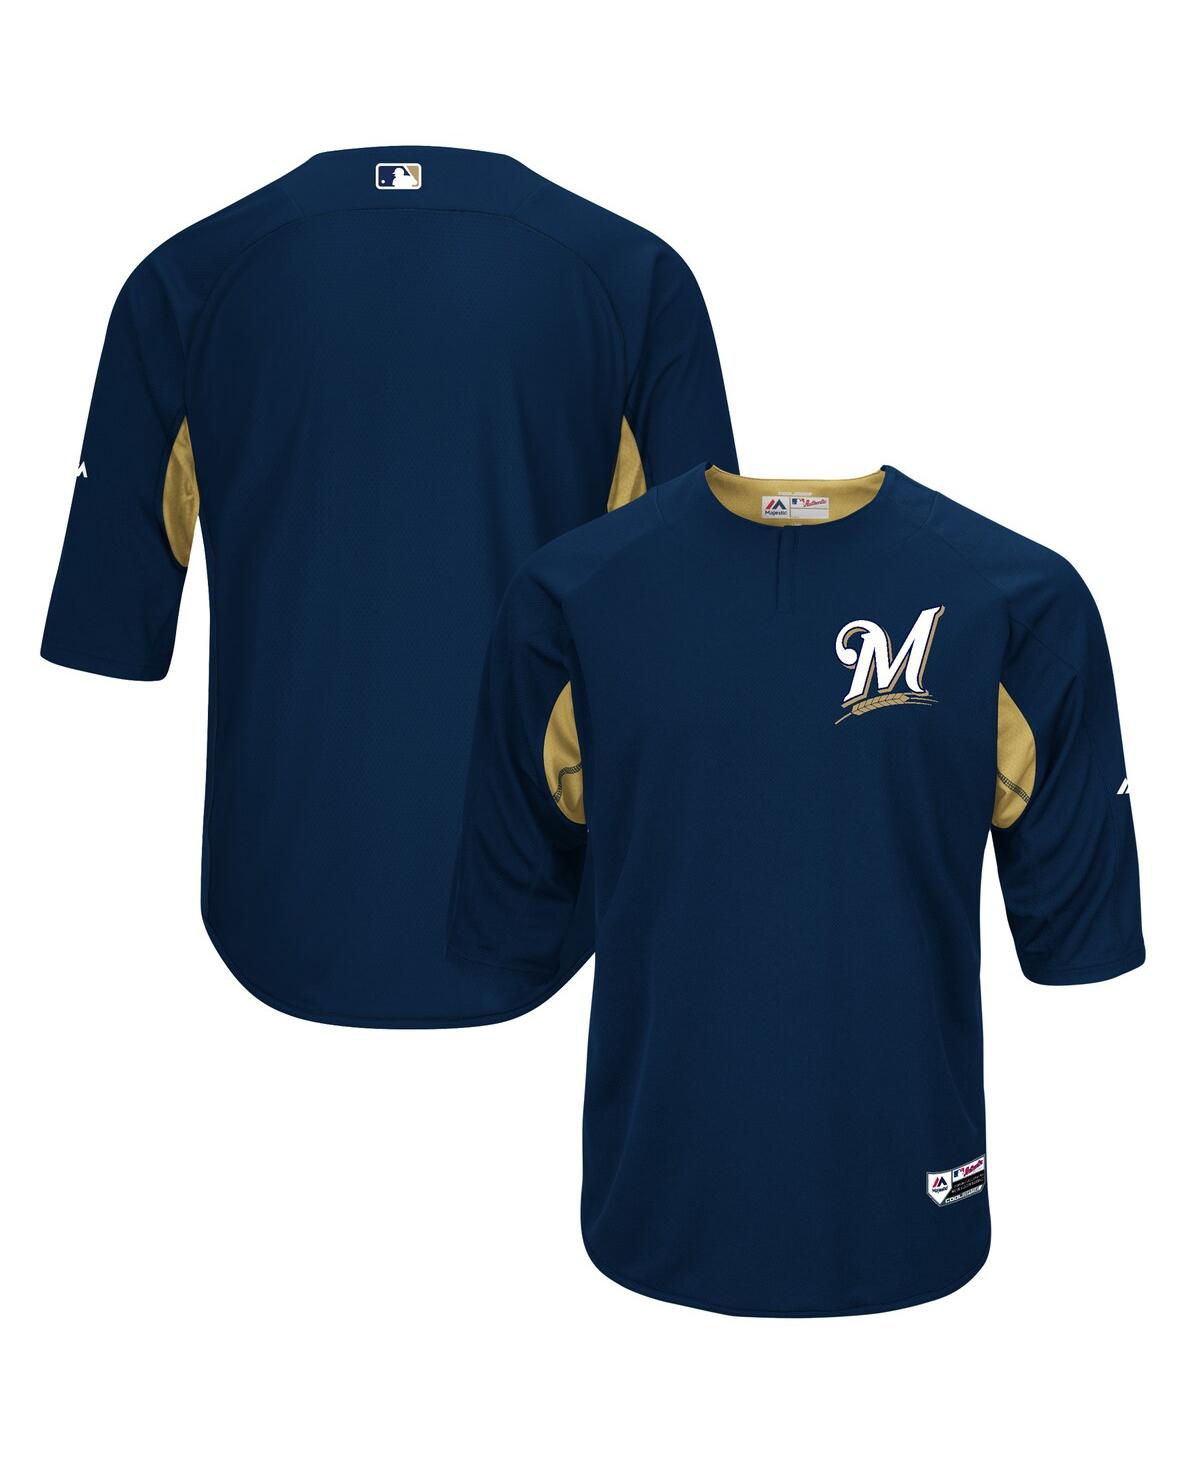 Men's Navy and Gold-Tone Milwaukee Brewers Authentic Collection On-Field 3 and 4-Sleeve Batting Practice Jersey - Navy, Gold-Tone